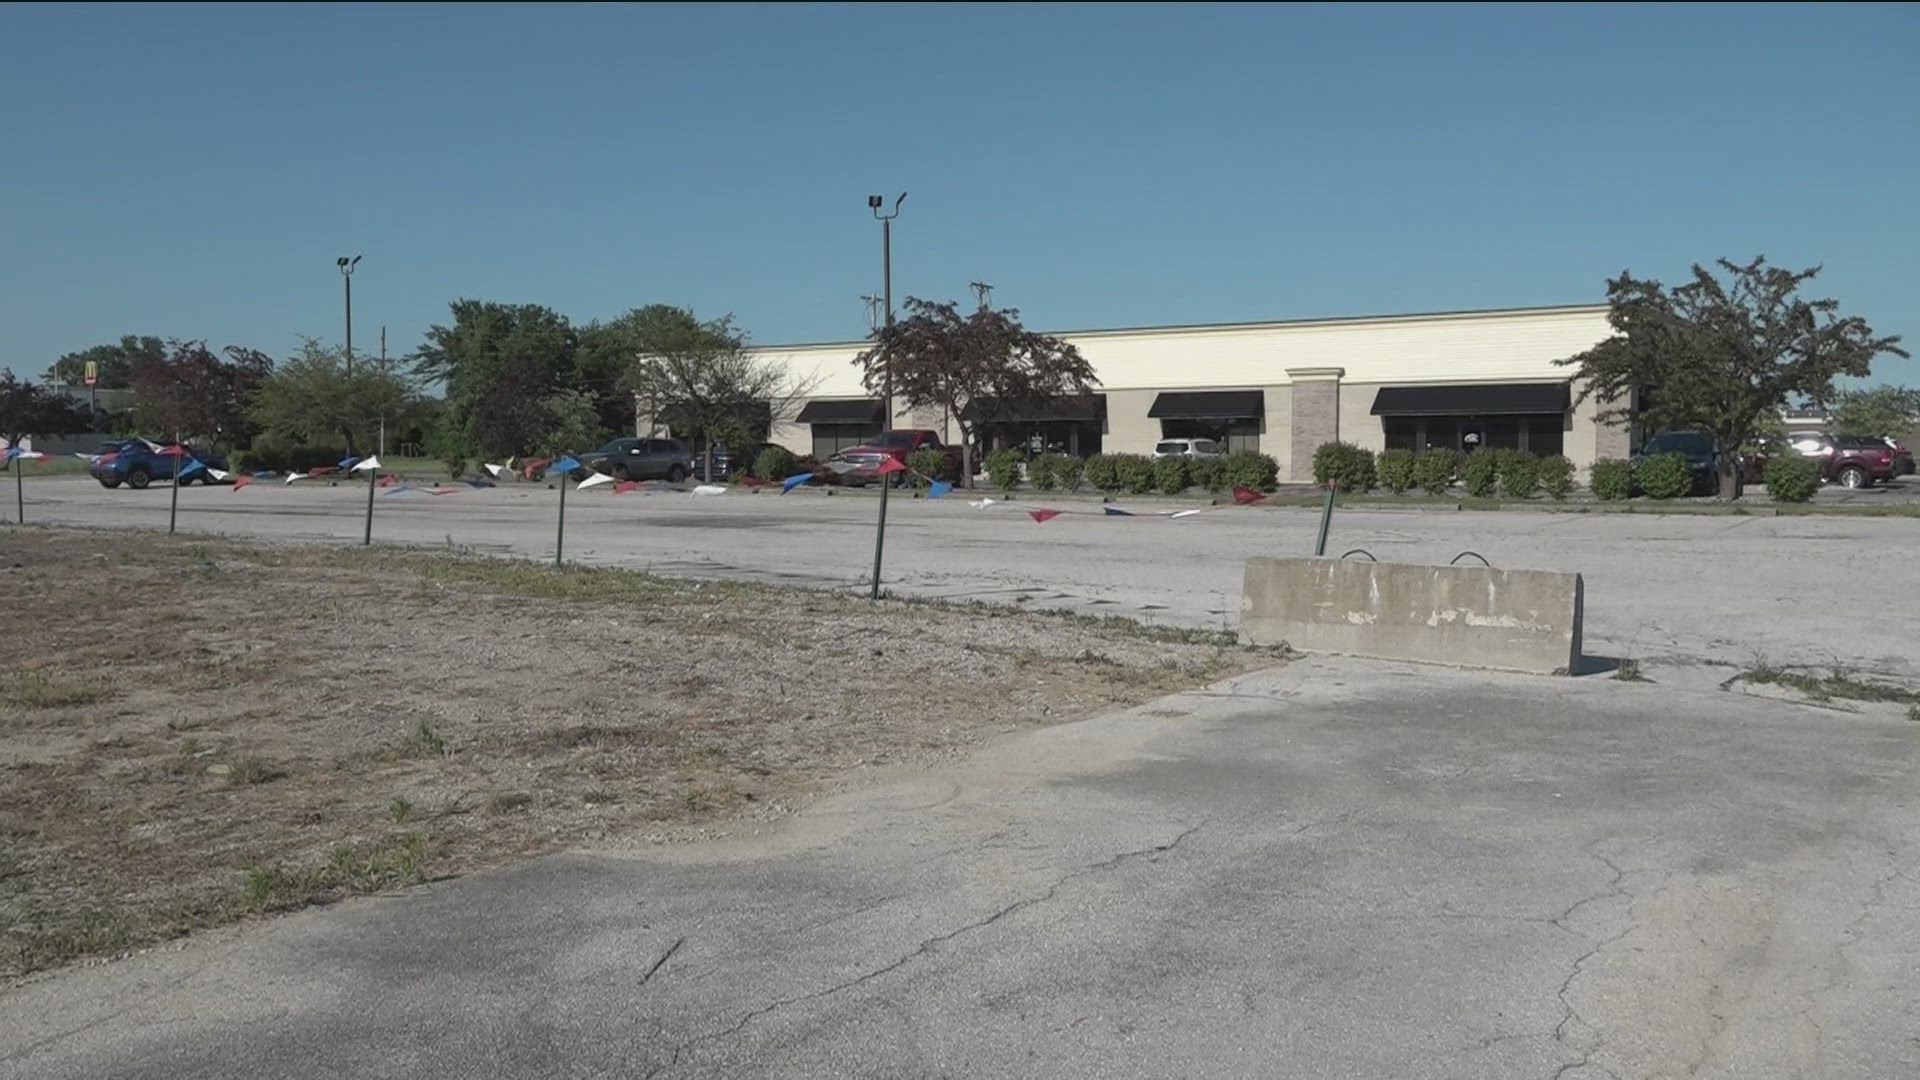 The city of Oregon will buy out its lease on the empty lot on Navarre Avenue for $4.5 million.